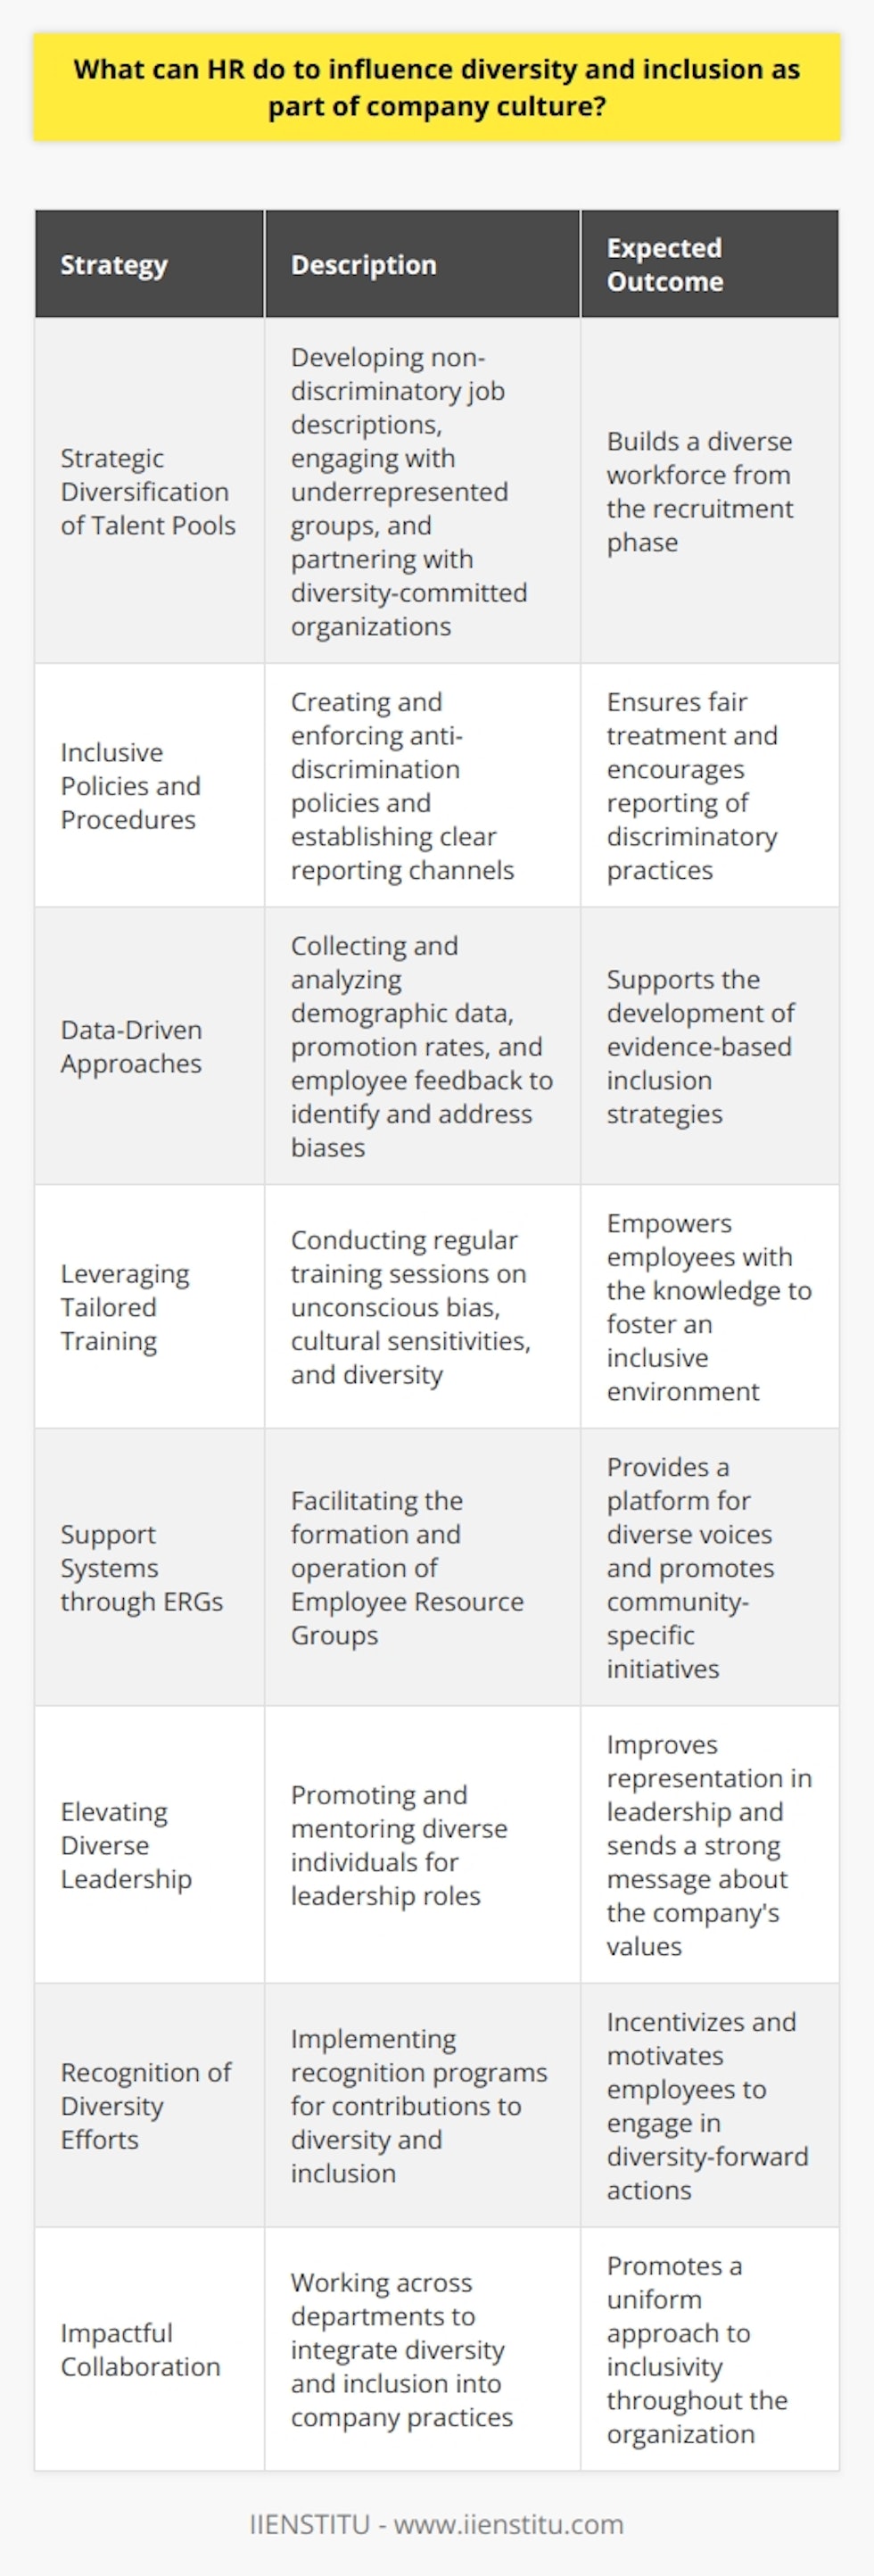 Human Resources (HR) departments are instrumental in shaping a company's culture, particularly in the areas of diversity and inclusion. Their role can significantly affect the level of inclusiveness and acceptance within the organization. Below, we delve into some strategies HR can employ to enhance these critical aspects of the workplace culture.Strategic Diversification of Talent PoolsHR can influence diversity right from the outset by diversifying the recruitment pipeline. This involves crafting non-discriminatory job descriptions, reaching out to underrepresented groups through various channels, and partnering with organizations such as IIENSTITU that share a commitment to diversity. By consciously targeting an assorted talent pool, HR sets the stage for a rich, varied team.Inclusive Policies and ProceduresDeveloping policies that reflect inclusivity is paramount. HR can put in place procedures that guard against discrimination and encourage fair treatment. This includes creating clear pathways for reporting issues, establishing a standard for behavior that celebrates diversity, and ensuring these policies are transparent and consistently enforced.Data-Driven ApproachesInstead of solely relying on traditional practices, HR can use data to inform their diversity and inclusion strategies. By analyzing metrics such as demographic data, promotion rates, and employee feedback, HR professionals can identify areas where bias may exist and work towards removing these barriers. Leveraging Tailored TrainingOngoing educational initiatives are crucial. HR should facilitate regular diversity training, emphasizing unconscious bias, cultural competencies, and sensitivity. Customized training modules should extend beyond mere compliance to truly engage employees in understanding the importance of an inclusive workplace.Support Systems through ERGsEmployee Resource Groups (ERGs) are a formidable force in advancing workplace diversity and inclusion. HR should encourage and support the development of ERGs, providing them with the resources and executive sponsorship needed to be effective. These groups can tackle specific issues relating to underrepresented employee communities, lending a voice to the diverse workforce.Elevating Diverse LeadershipRepresentation matters, especially in management and leadership roles. HR can consciously promote from within, mentor, or develop high-potential employees from diverse backgrounds, thereby sending a strong message about the organization's commitment to inclusion.Recognition of Diversity EffortsRecognition programs overseen by HR can motivate employees to engage in pro-diversity and inclusion behaviors. By highlighting employees or teams that contribute positively to the inclusive culture, HR can transform the company narrative and attitudes towards diversity.Impactful CollaborationIt's important for HR to collaborate across departments to ensure that diversity and inclusion are woven into all aspects of the company. Whether it's working with marketing to ensure diverse representation in company materials or aligning with the product development teams to incorporate inclusive design principles, HR's role in fostering a collaborative environment for inclusion cannot be overstated.In crafting these strategies, it is essential for HR to maintain an ongoing dialogue on diversity and inclusion, making it known that these are not just HR initiatives but business imperatives. As gatekeepers of company culture, HR professionals have a profound opportunity to influence change and drive a company towards a genuinely inclusive future. Through intentional and well-executed strategies, HR can create a vibrant and inclusive company culture that not only benefits employees but also propels the company towards greater innovation and success.